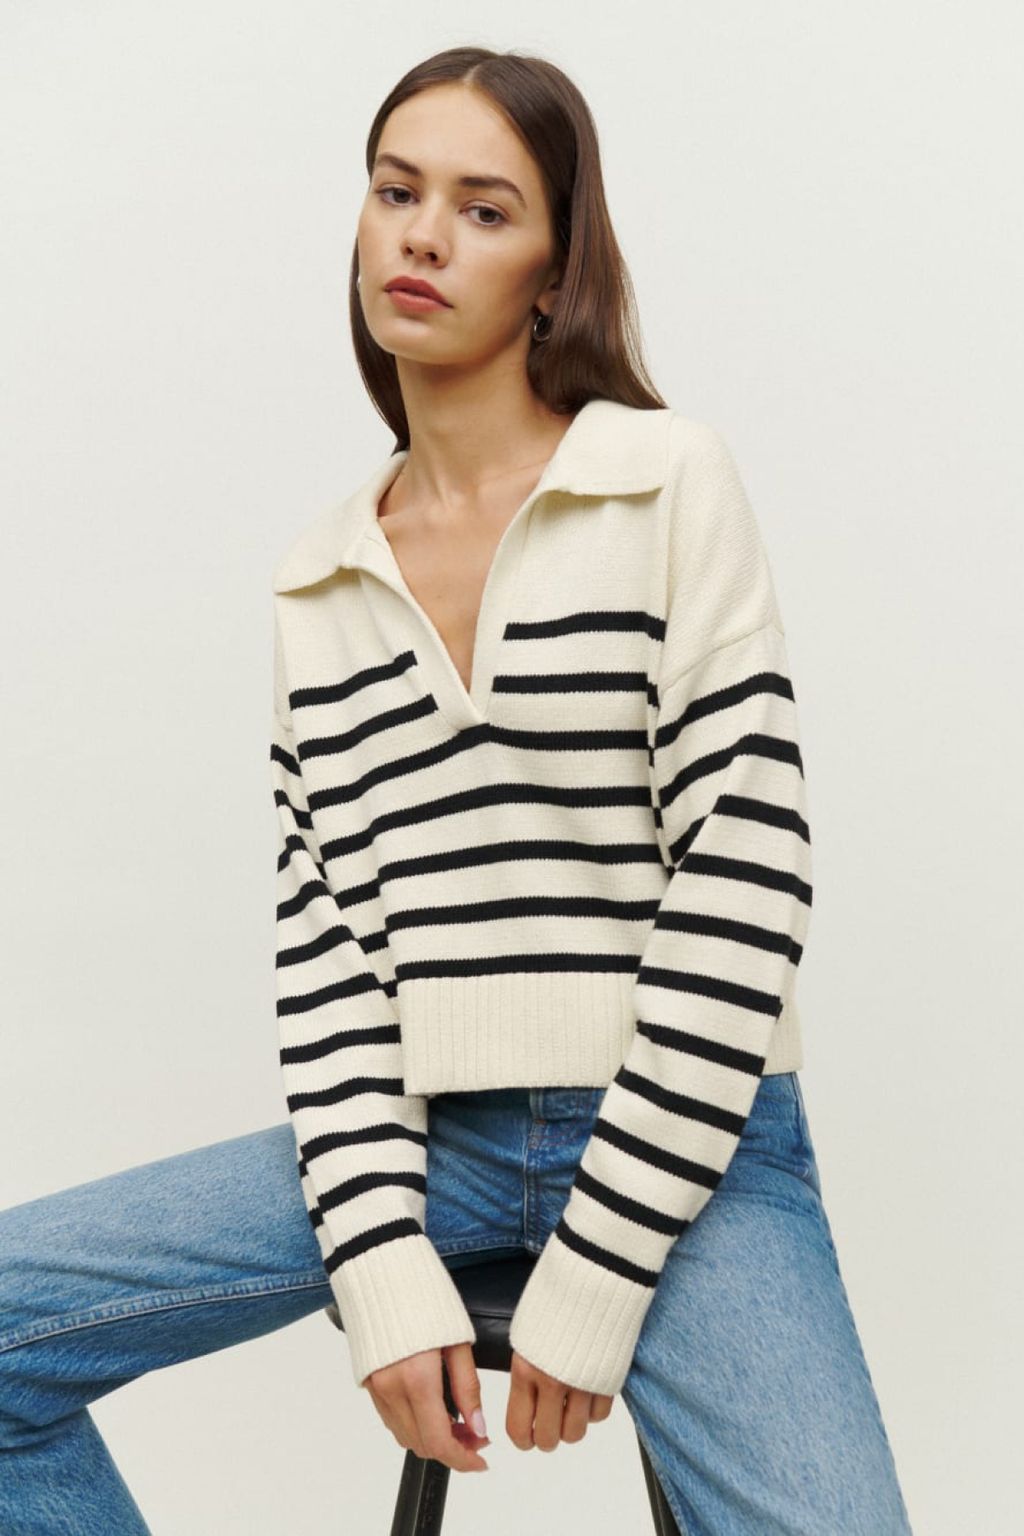 The 30 Best Lightweight Summer Sweaters, According to Fashion Experts ...